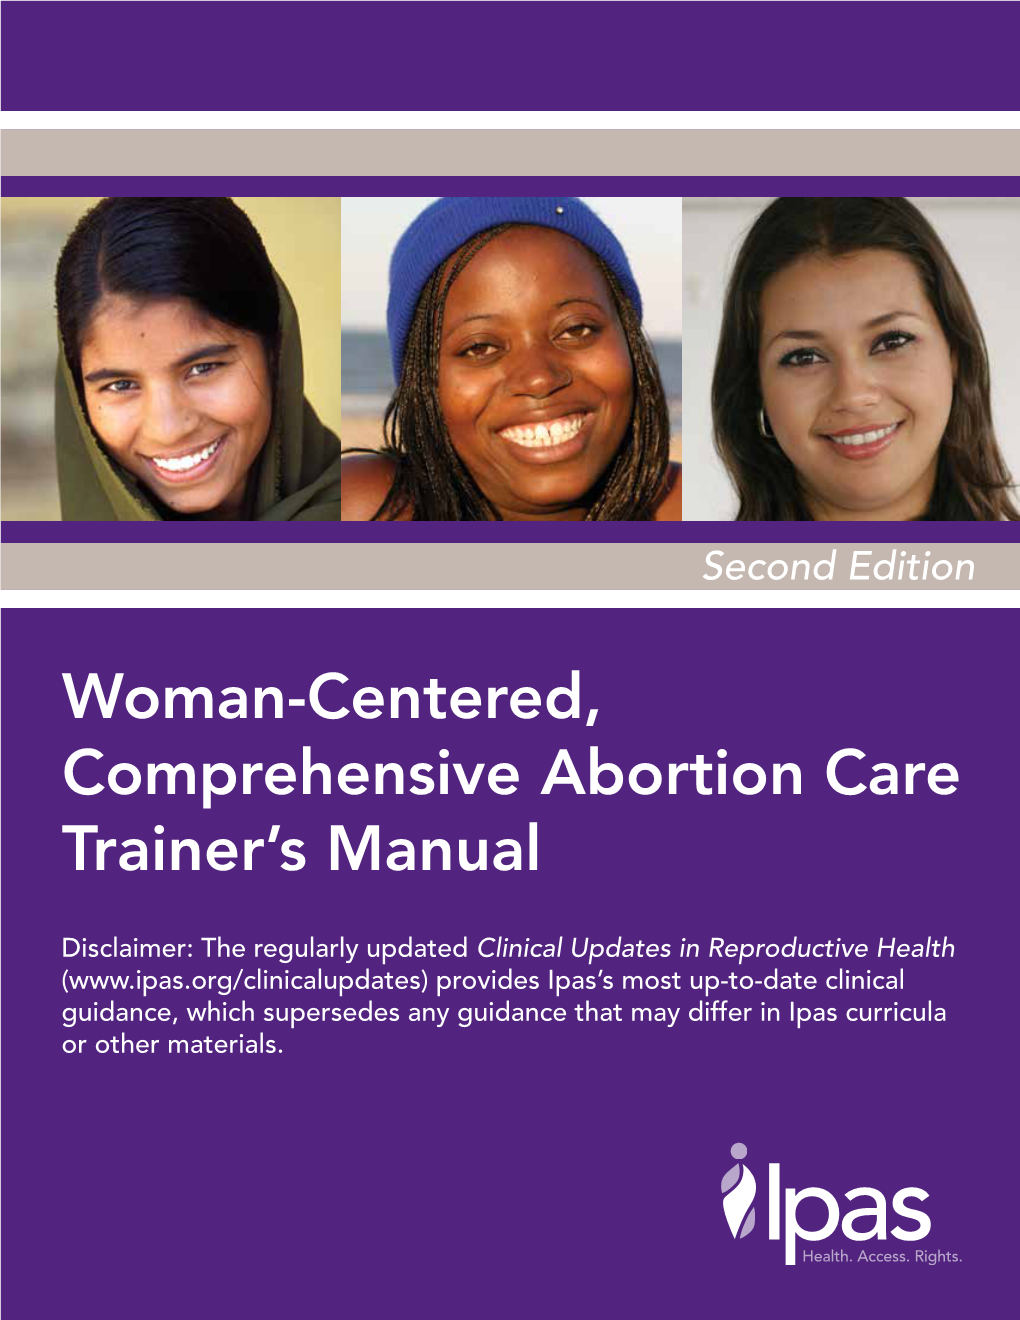 Woman-Centered, Comprehensive Abortion Care Trainer's Manual